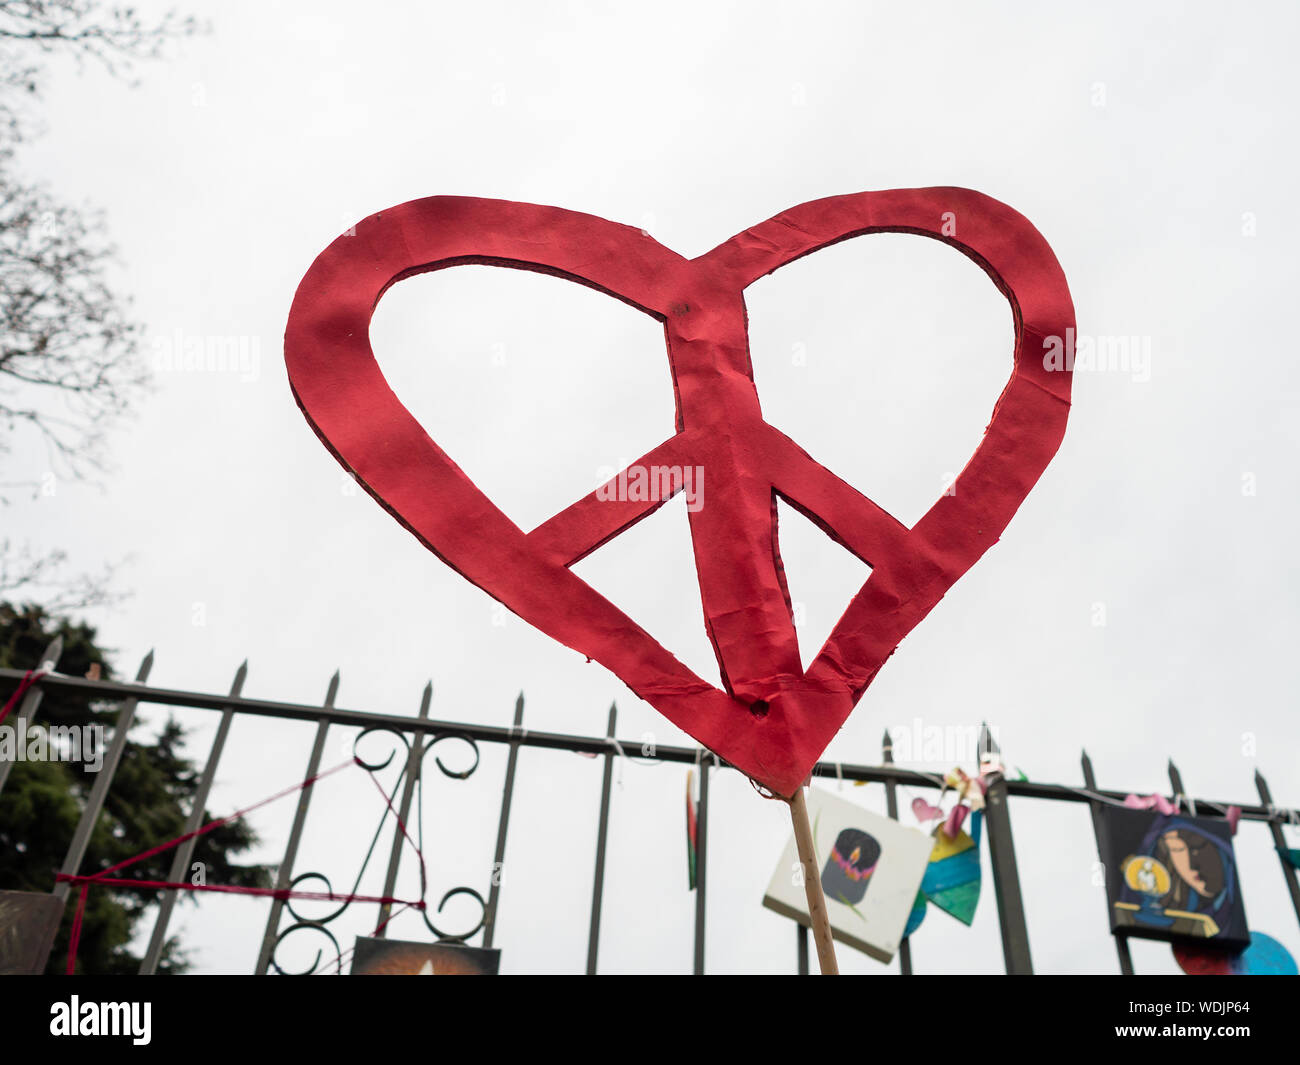 CHRISTCHURCH, NEW ZEALAND - MAY 2019: red peace heart at the mosque shooting memorial site Stock Photo